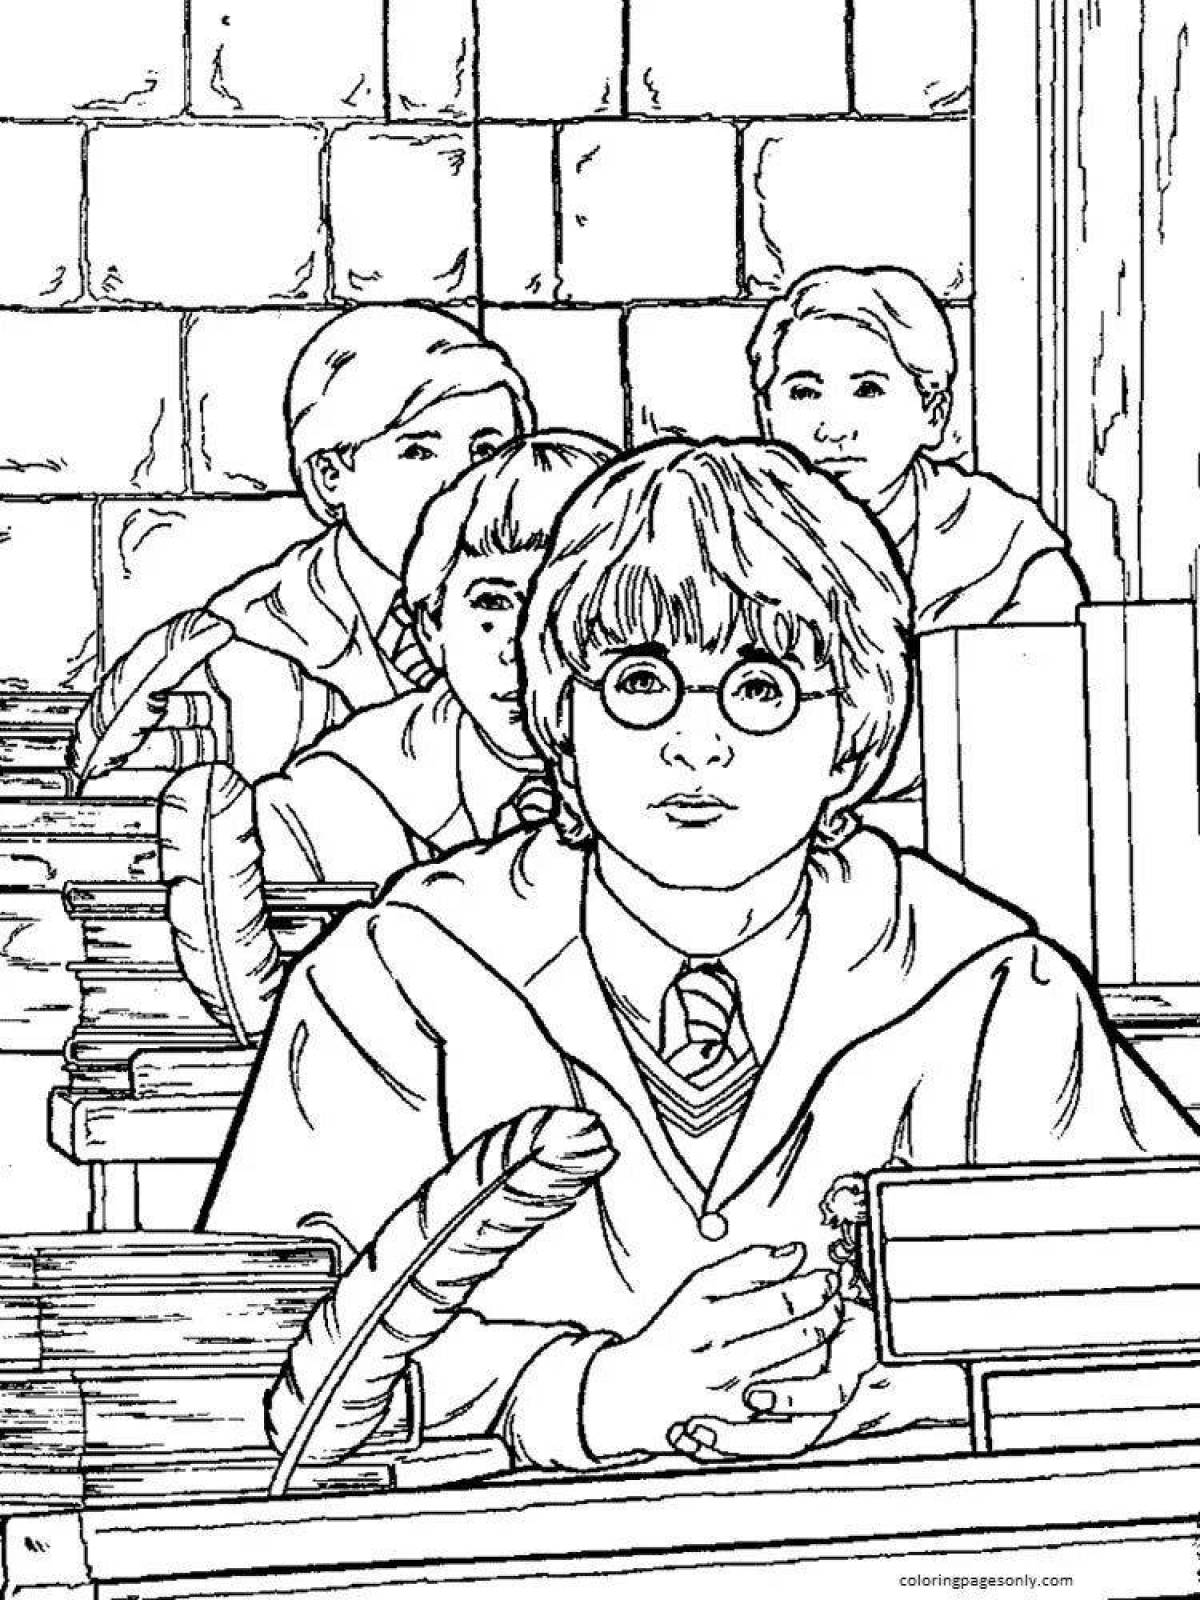 Harry potter easy coloring book